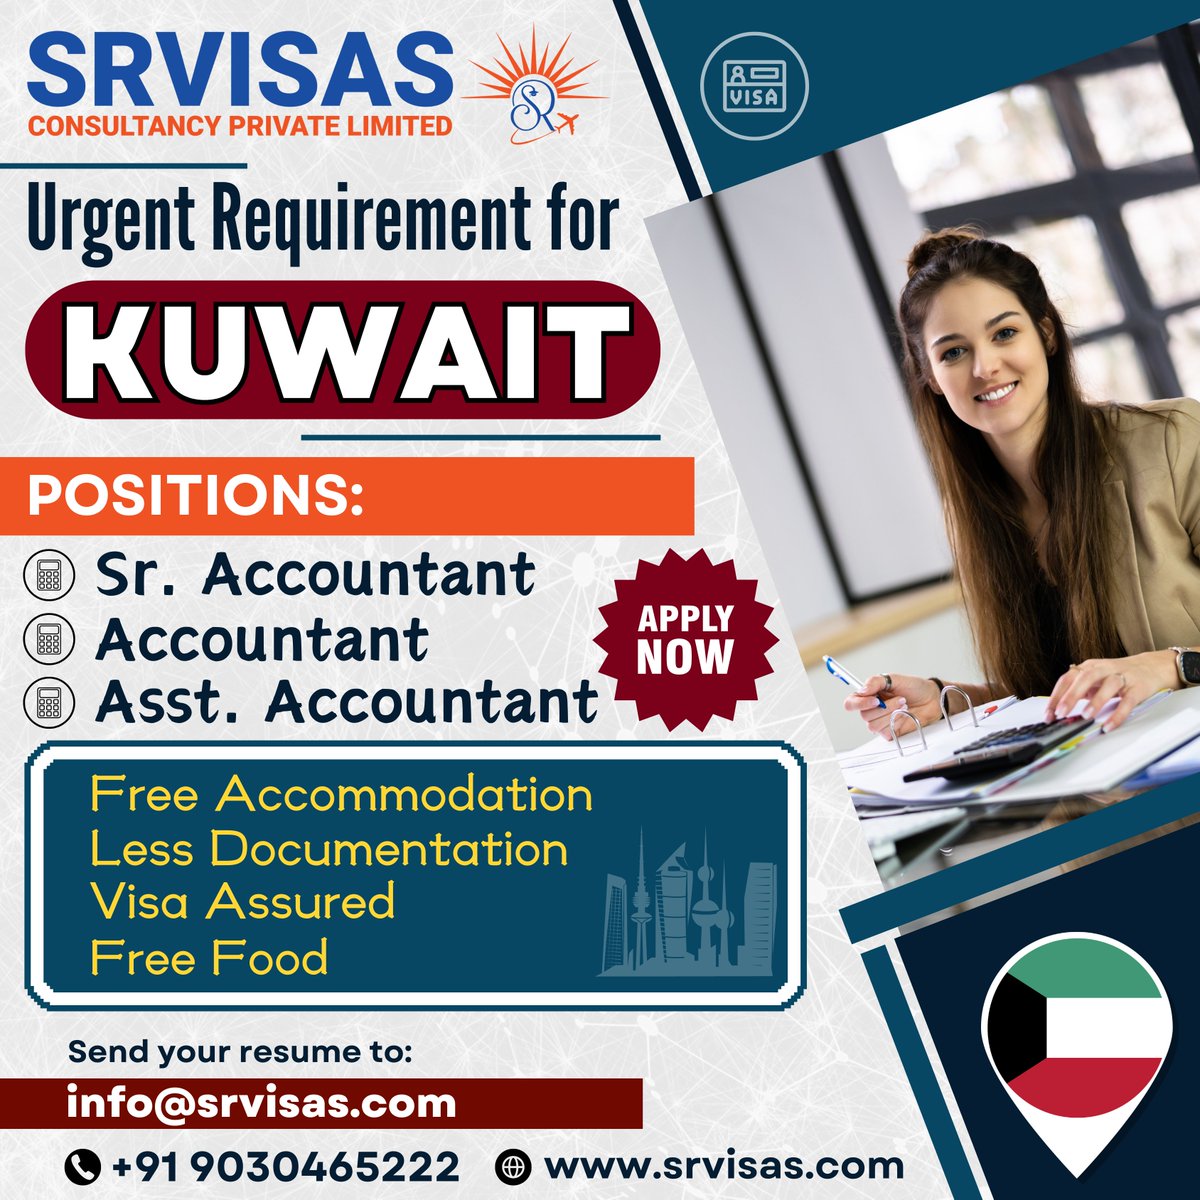 Urgent Requirement for KUWAIT. Available Positions are
💼 Sr. Accountant
💼 Accountant
💼 Asst. Accountant
For more details call now: +91 9030465222
or 
Visit Our Website: srvisas.com
#workvisa #workvisasupport #visaservices #workvisaconsultant #VisaSuccess #visa